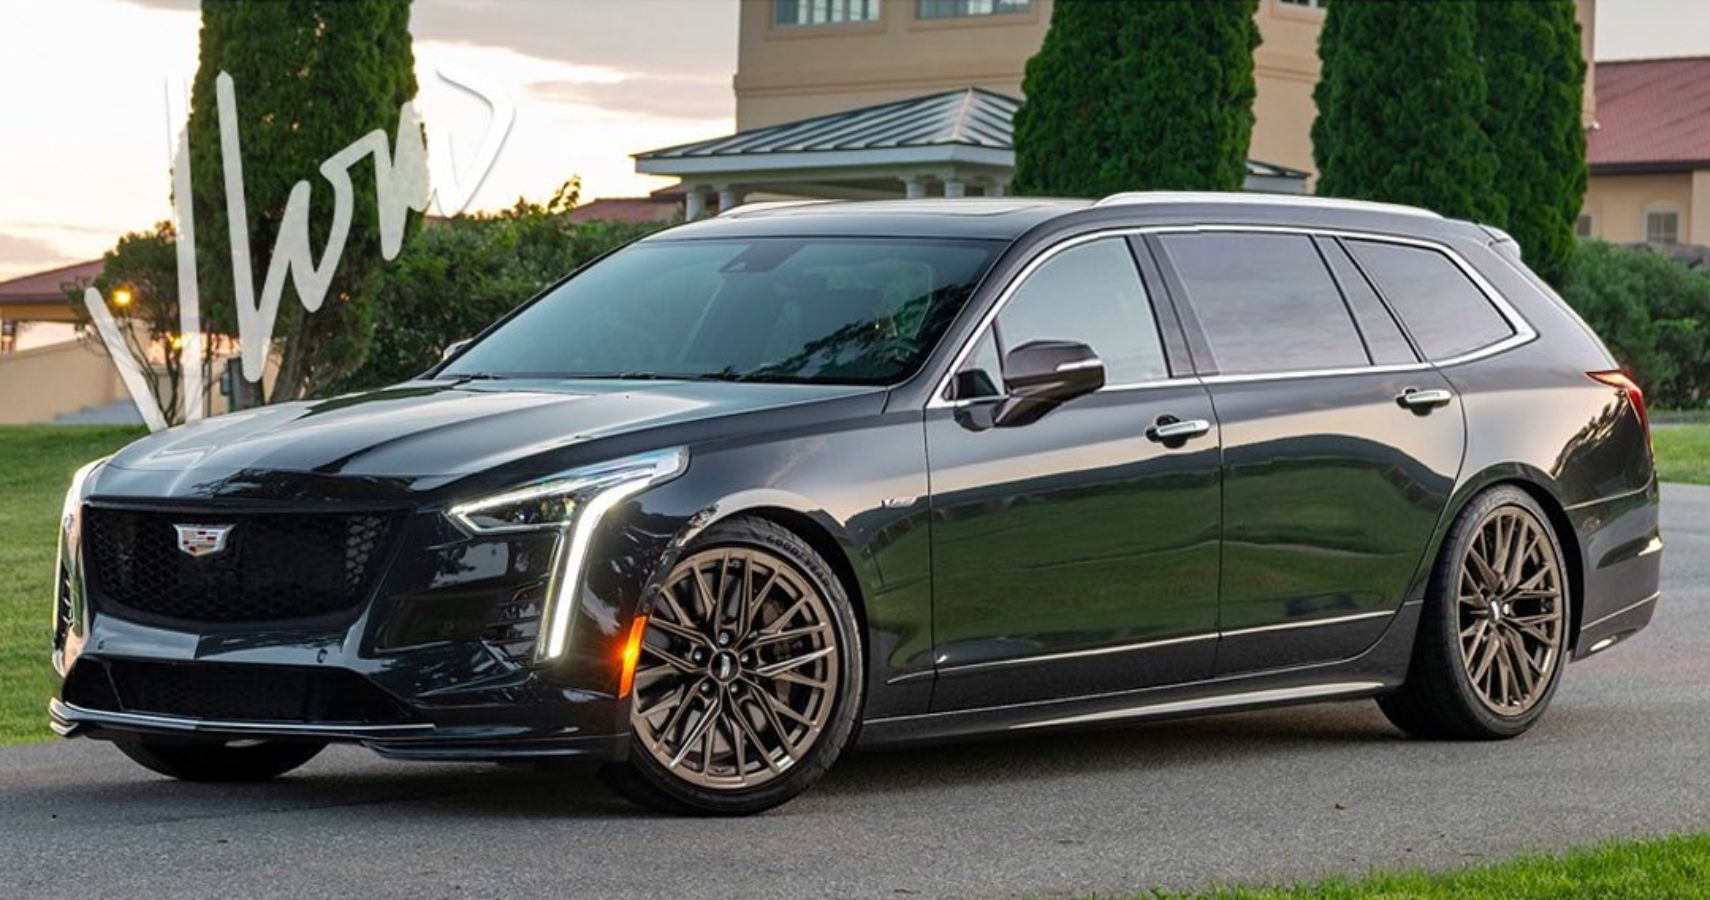 Cadillac CT6 Wagon Render in black - View From Front 